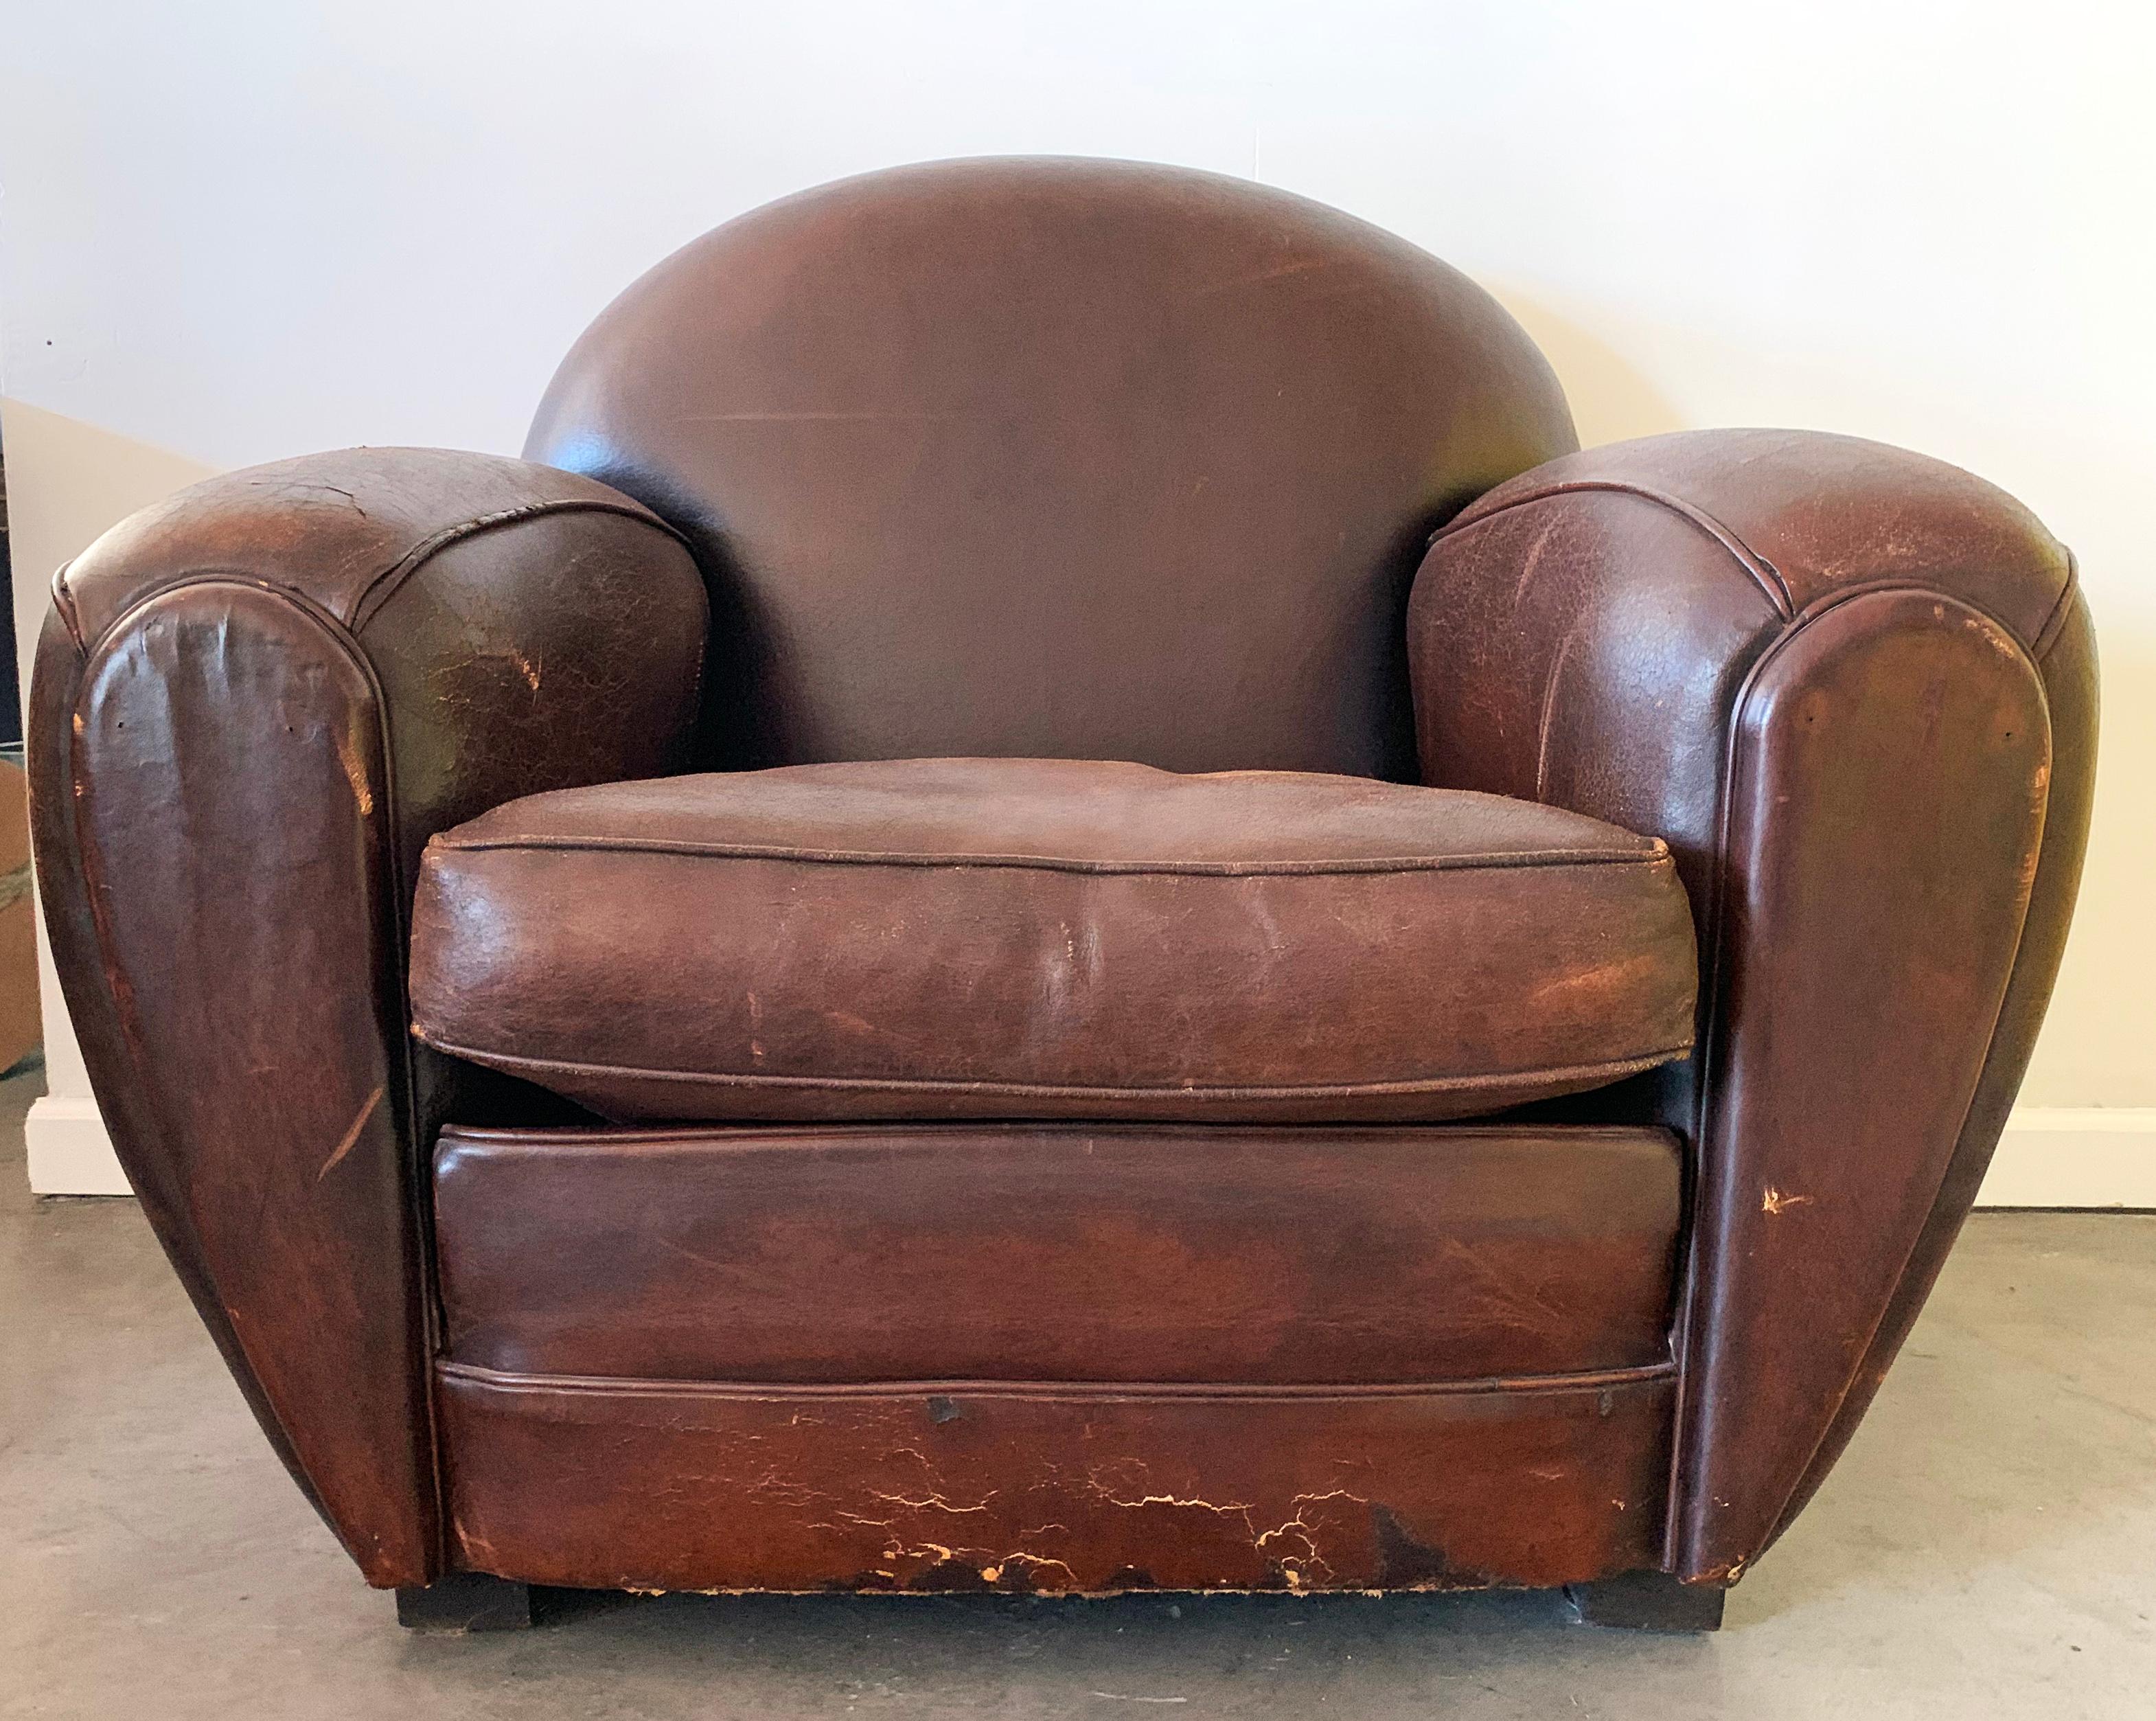 An absolutely round Art Deco leather club chair. This leather club chairs were purchased in the 1980s in Paris at the Les Puces de Saint-Ouen. The chair was re-dyed about 4 years ago and is in stunningly distressed condition with a wonderful patina